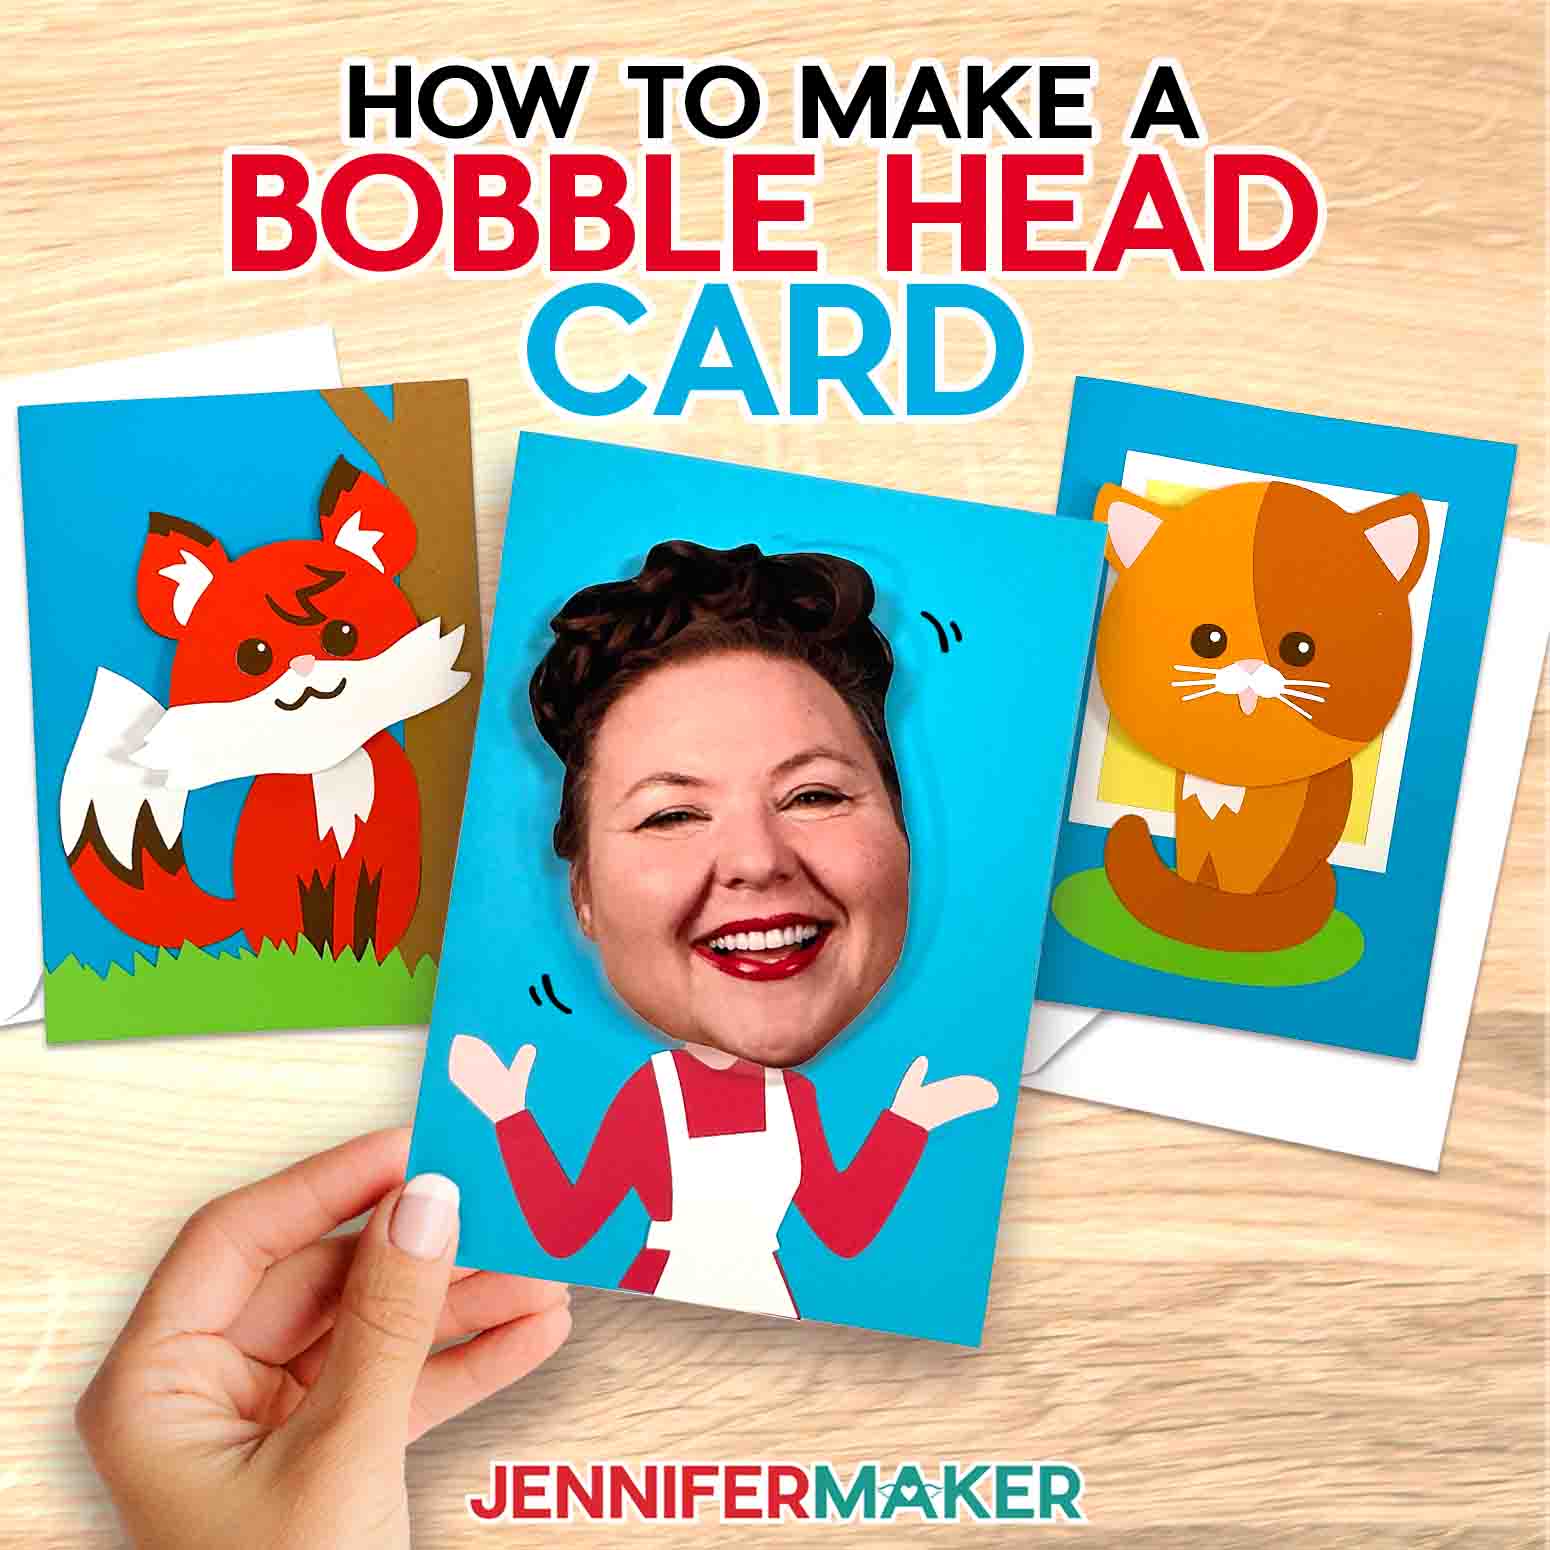 Make a Bobble Head Card With Your Custom Photo!